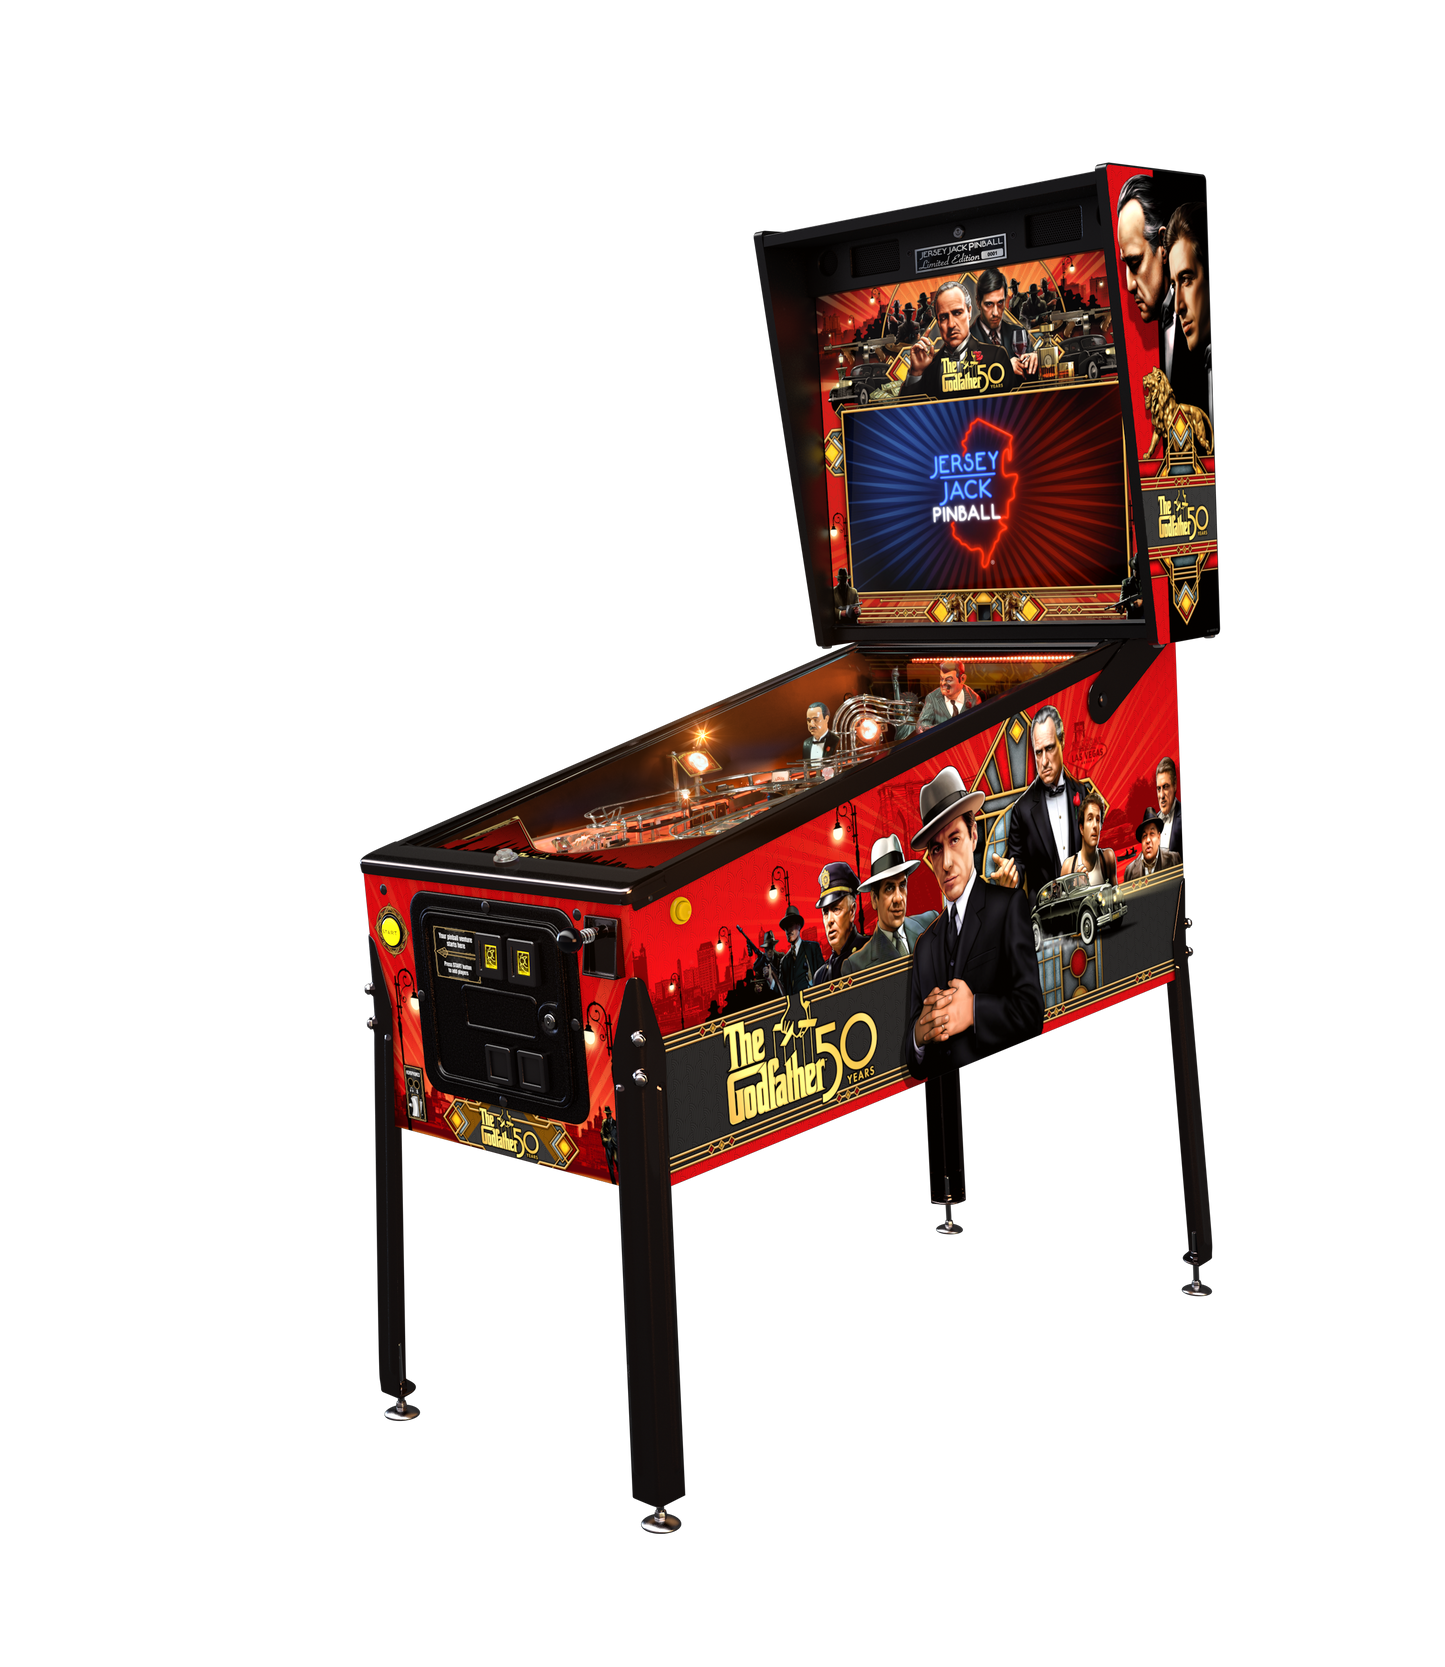 The Godfather LE - Jersey Jack Pinball